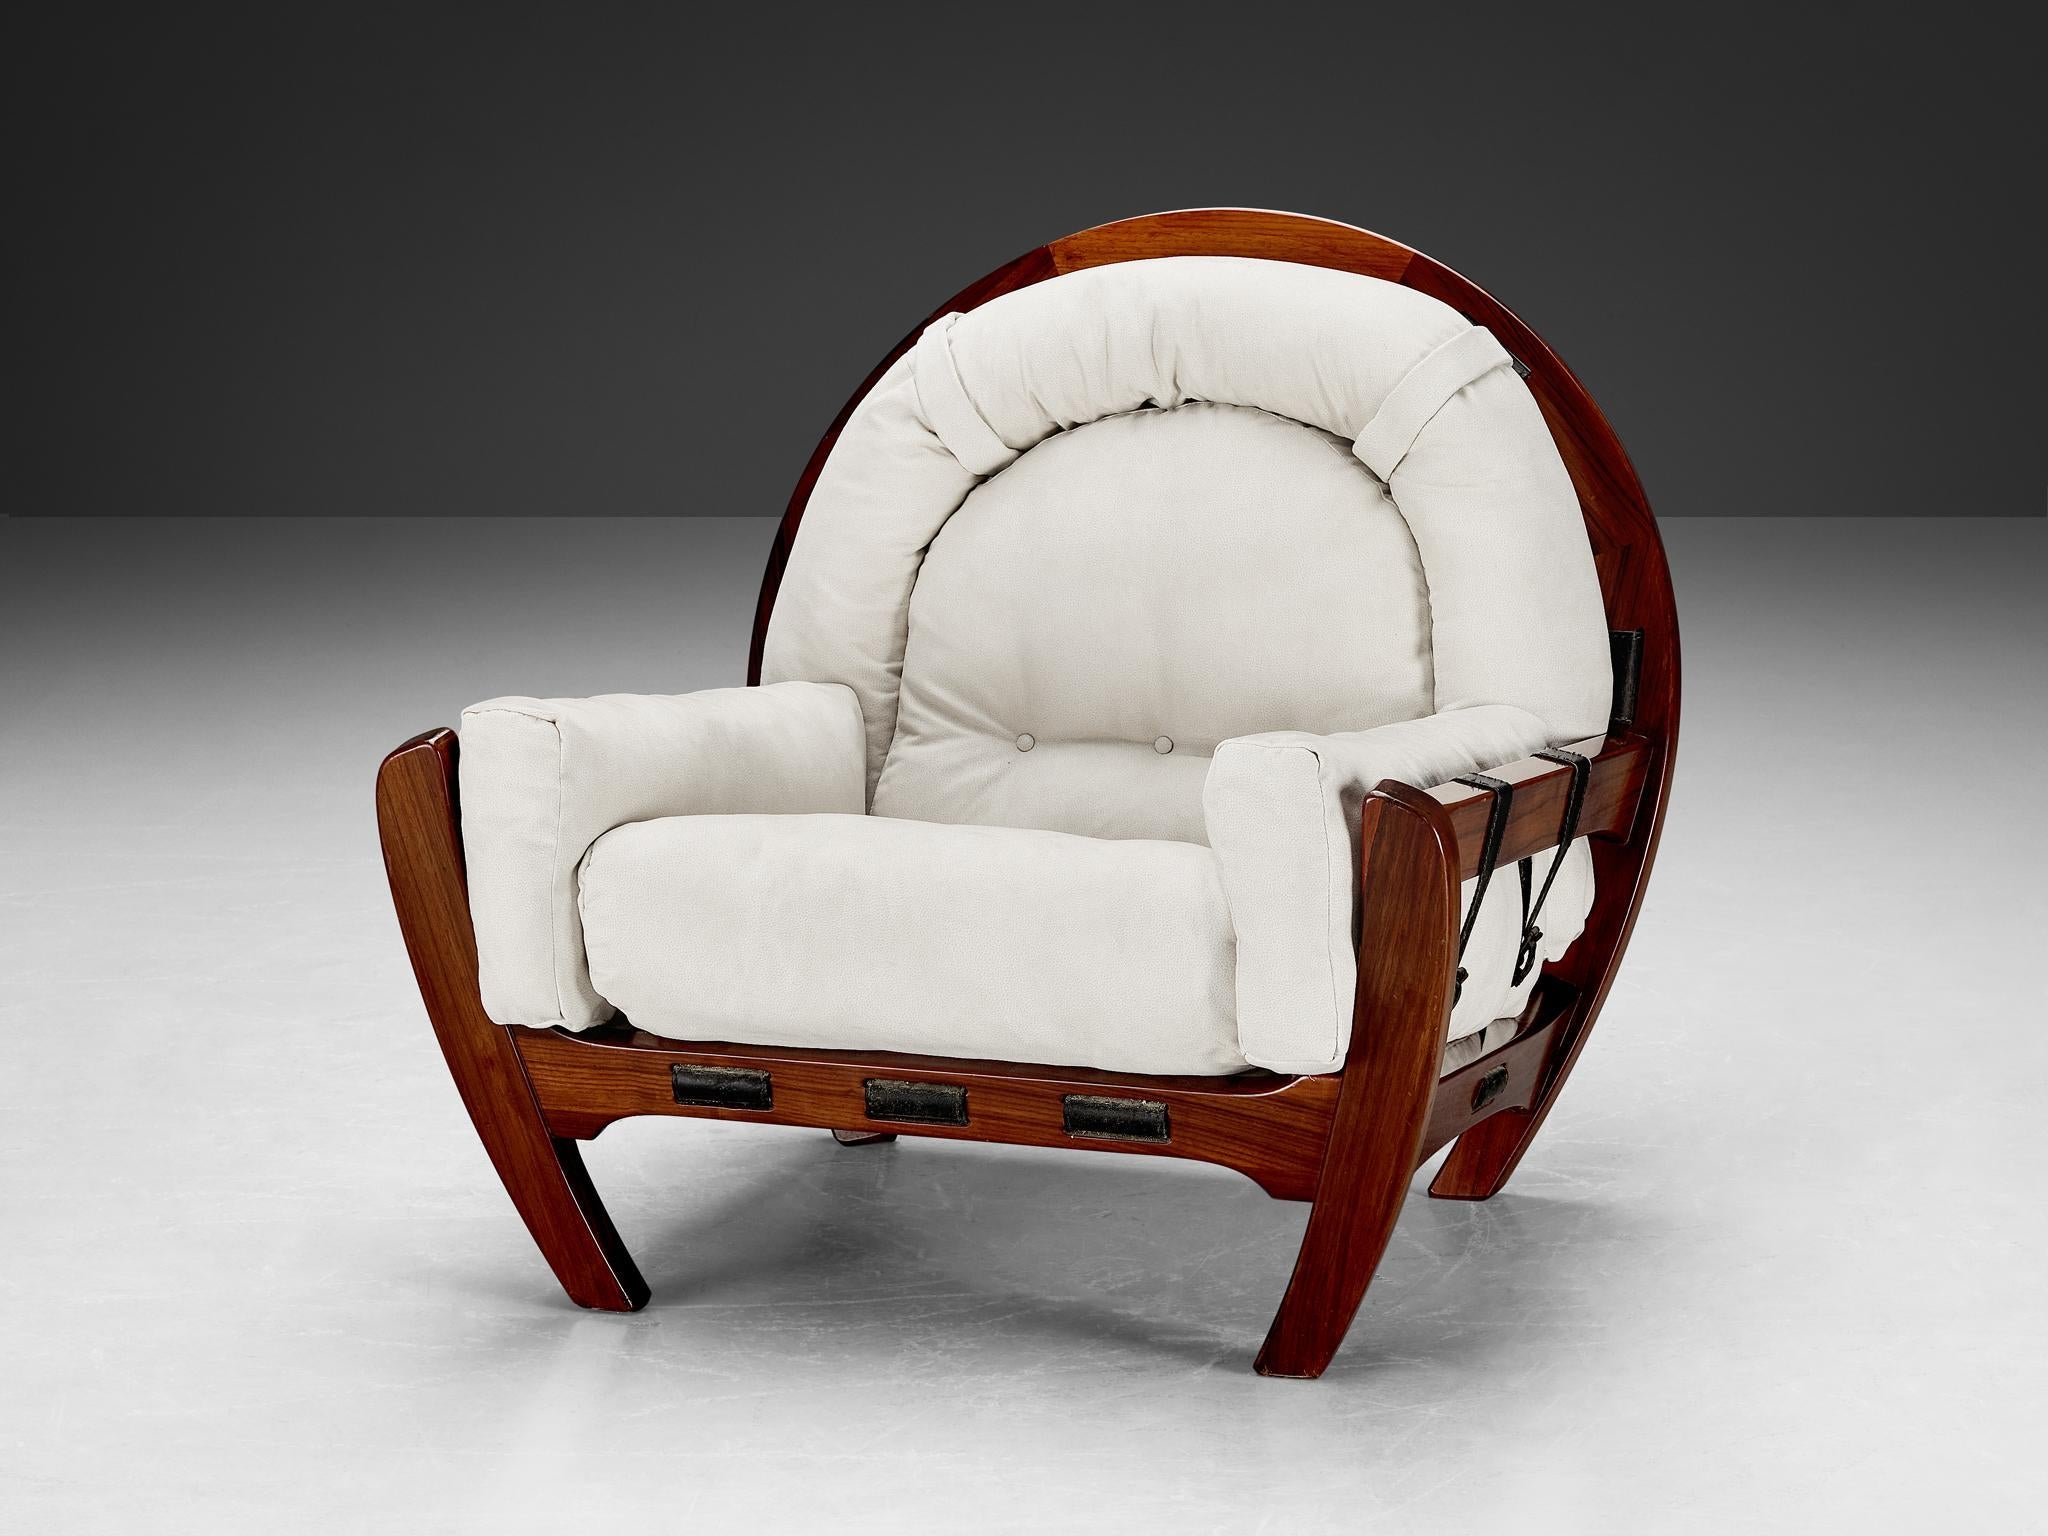 Luciano Frigerio 'Rancero' Lounge Chair with Ottoman in White Upholstery